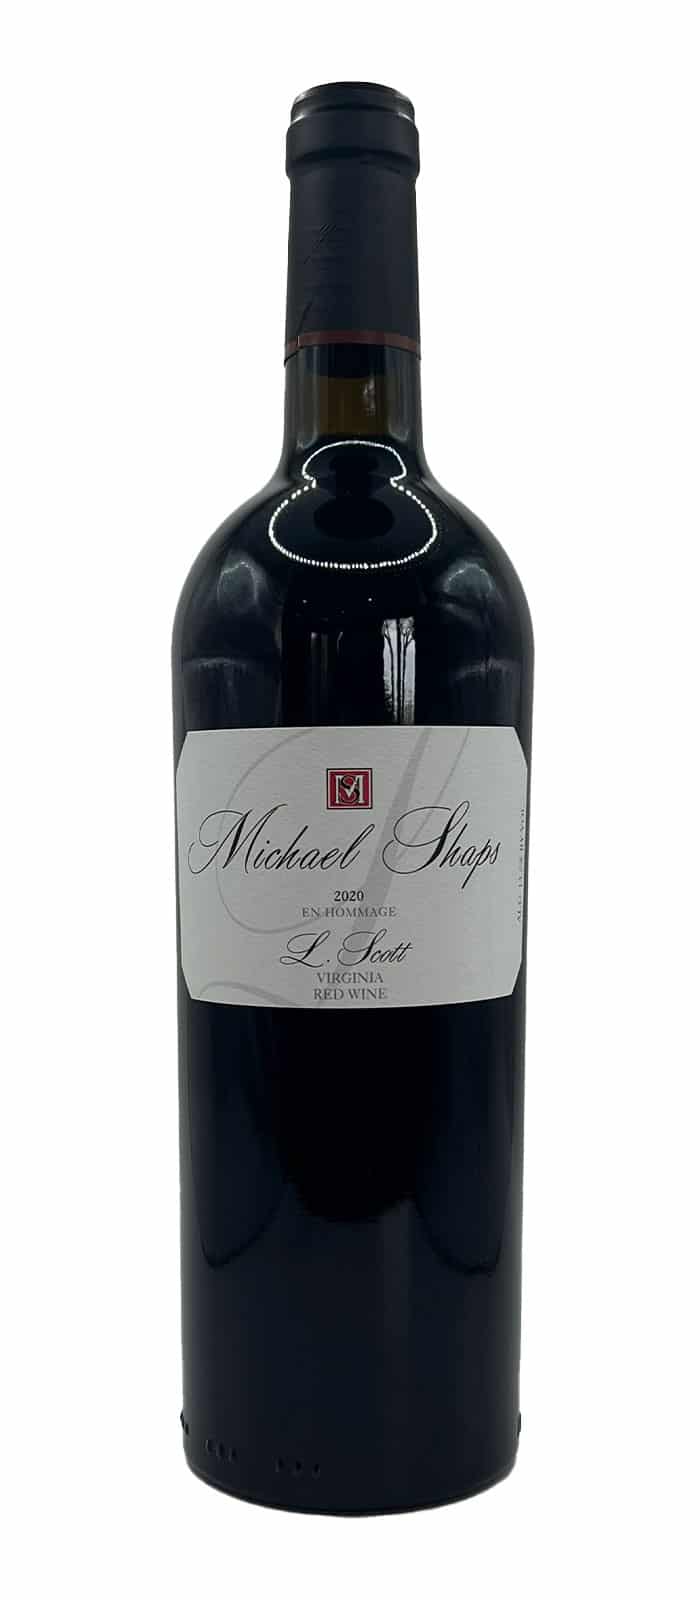 Bottle of Michael Shaps 2020 En Homage L. Scott Virginia Red Wine, Gold Medal, Virginia Governor's Cup Wine Competition.